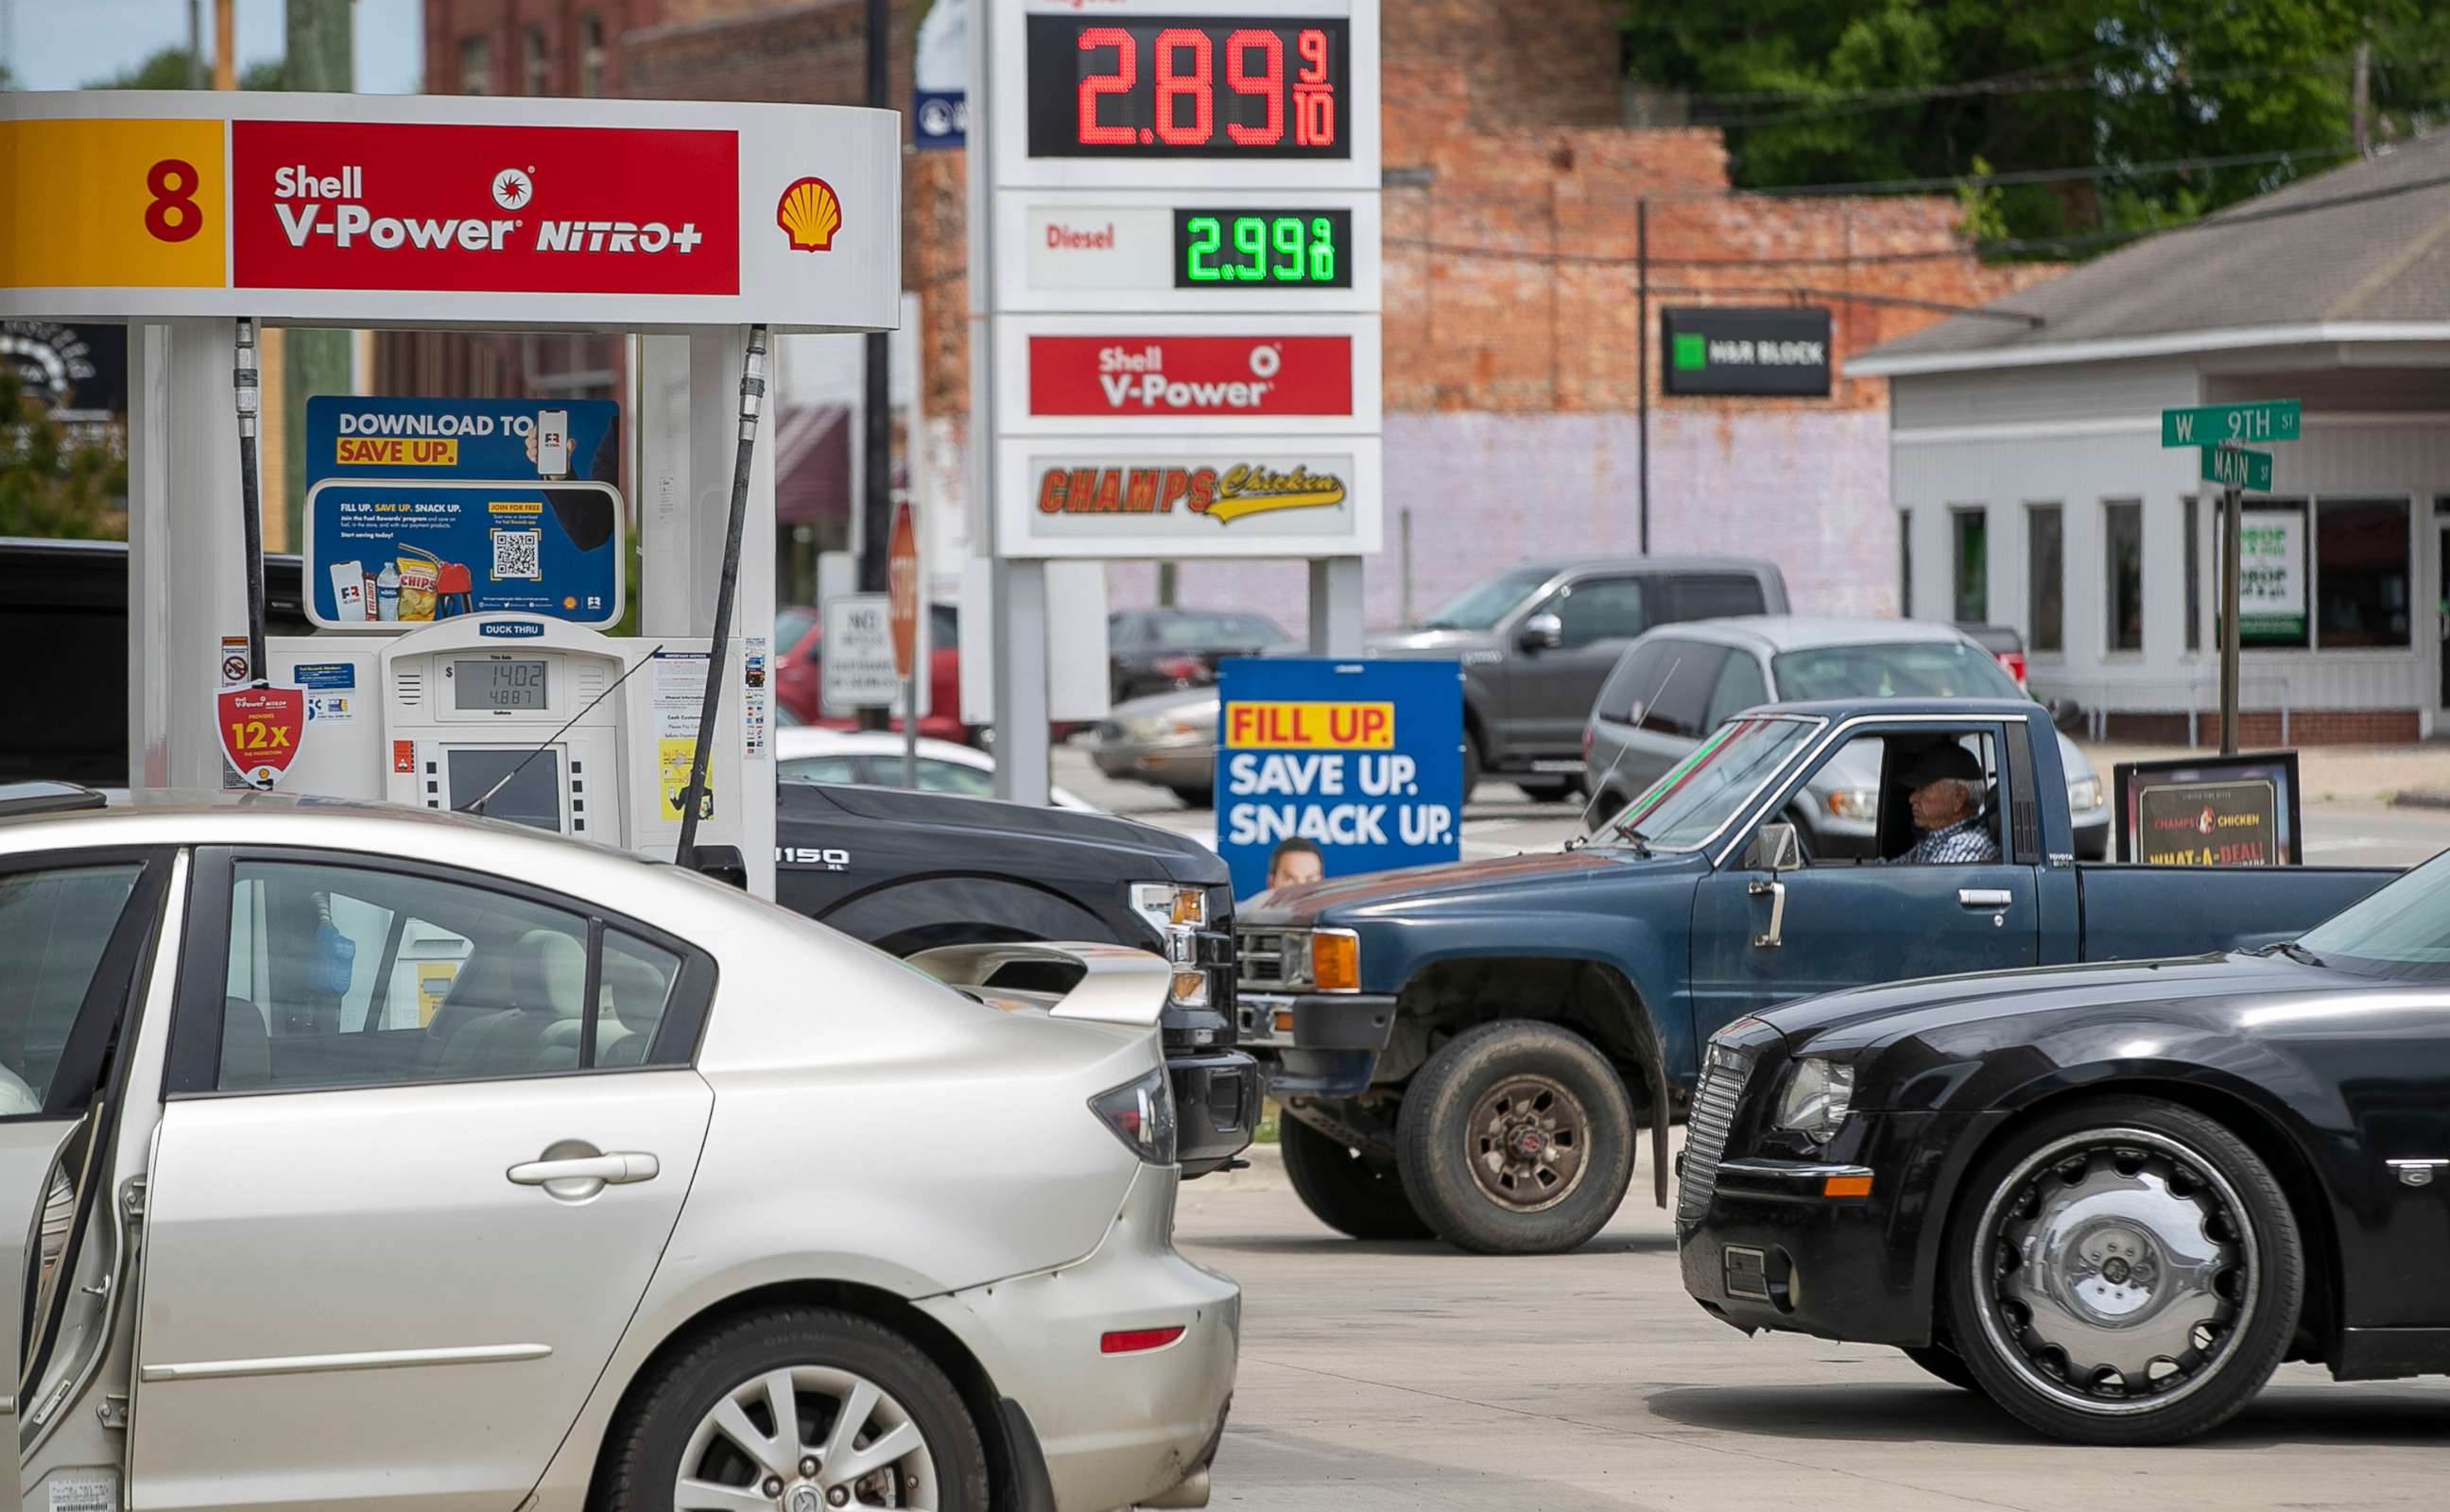 PHOTO: Customers wait in line to purchase fuel at the Duck-Thru in Scotland Neck, N.C. on May 11, 2021.